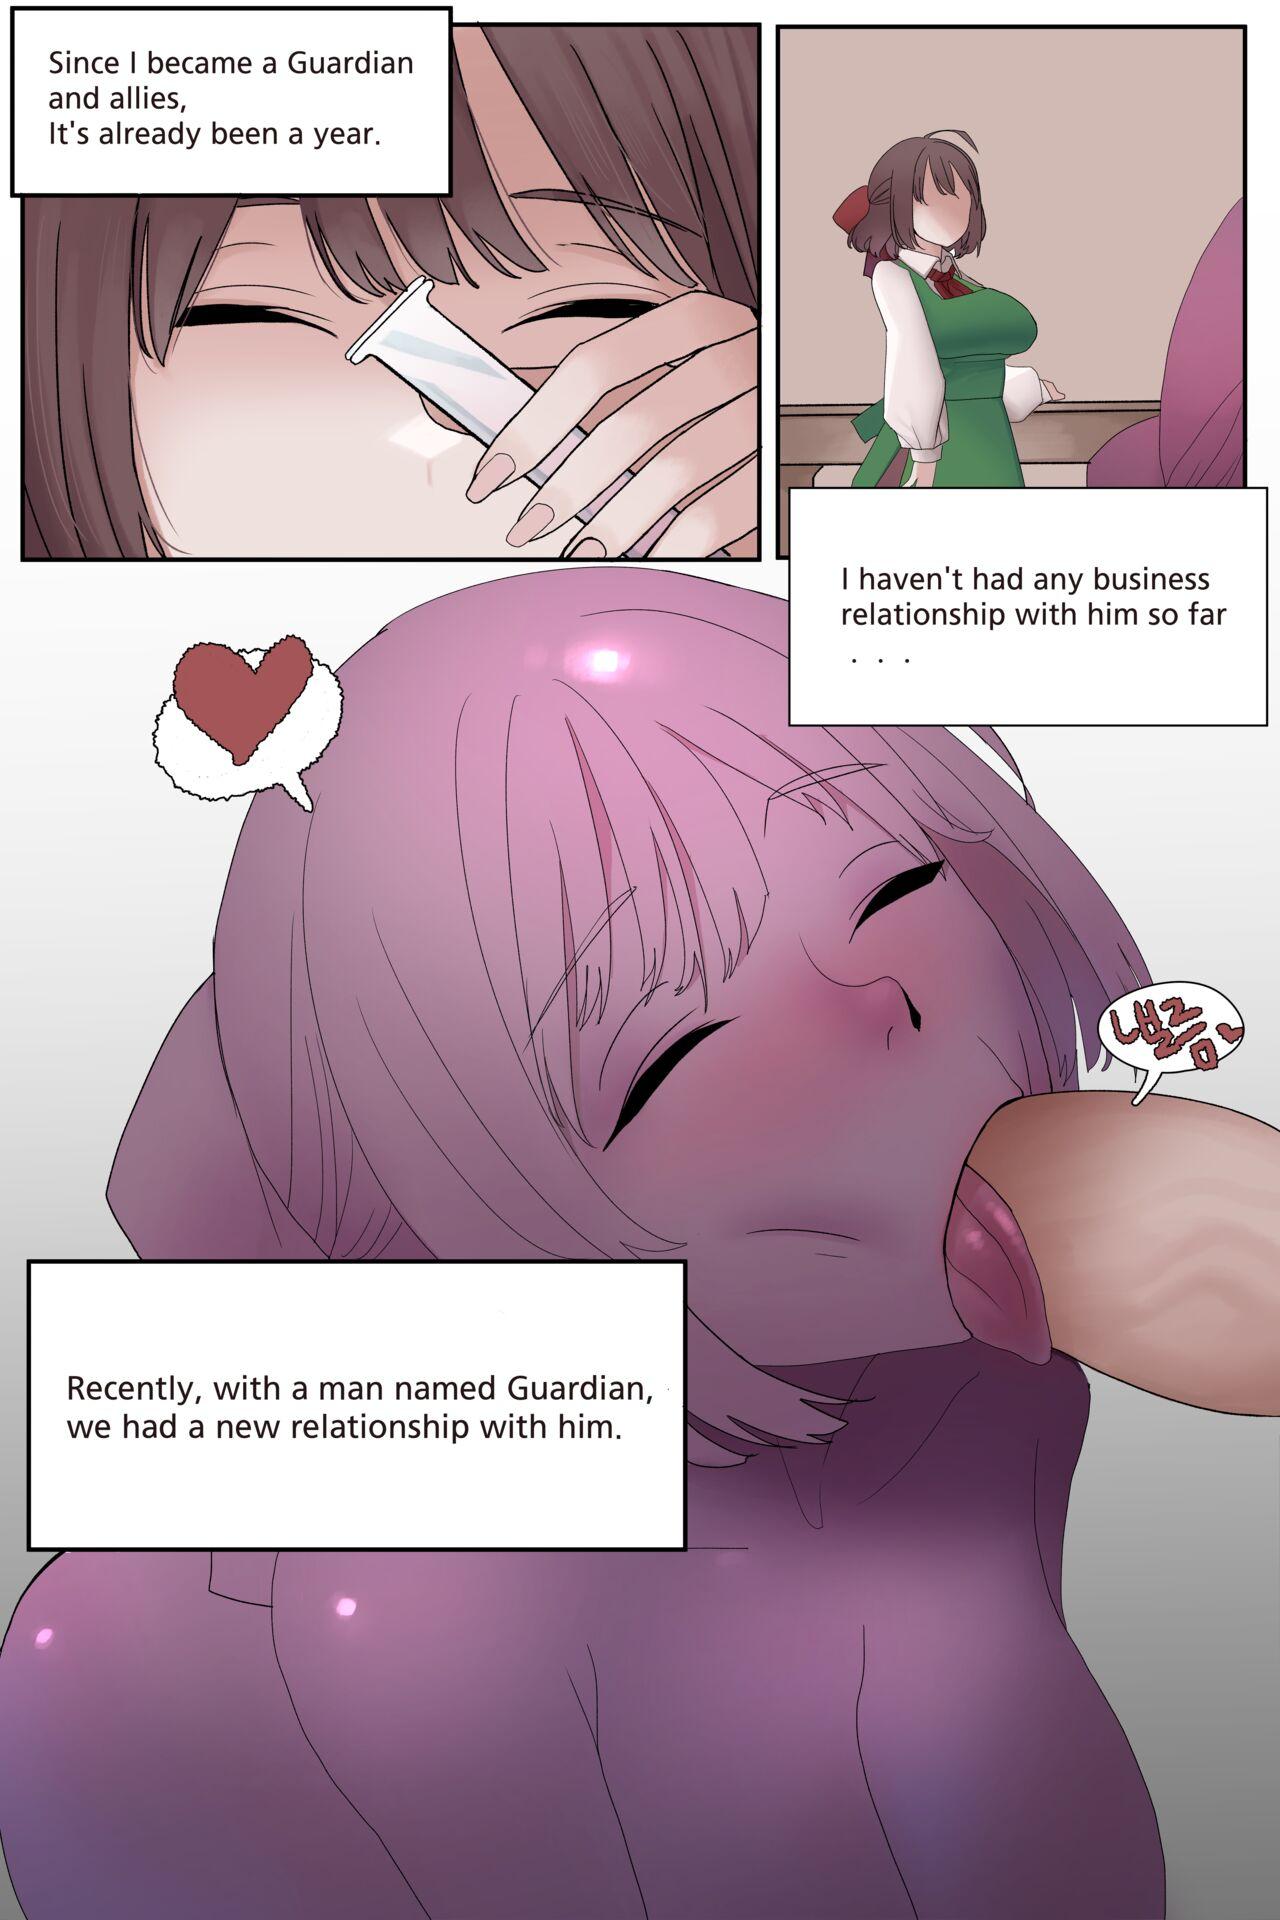 Submissive Relationship with Loraine - Guardian tales Gay Bukkakeboy - Page 1